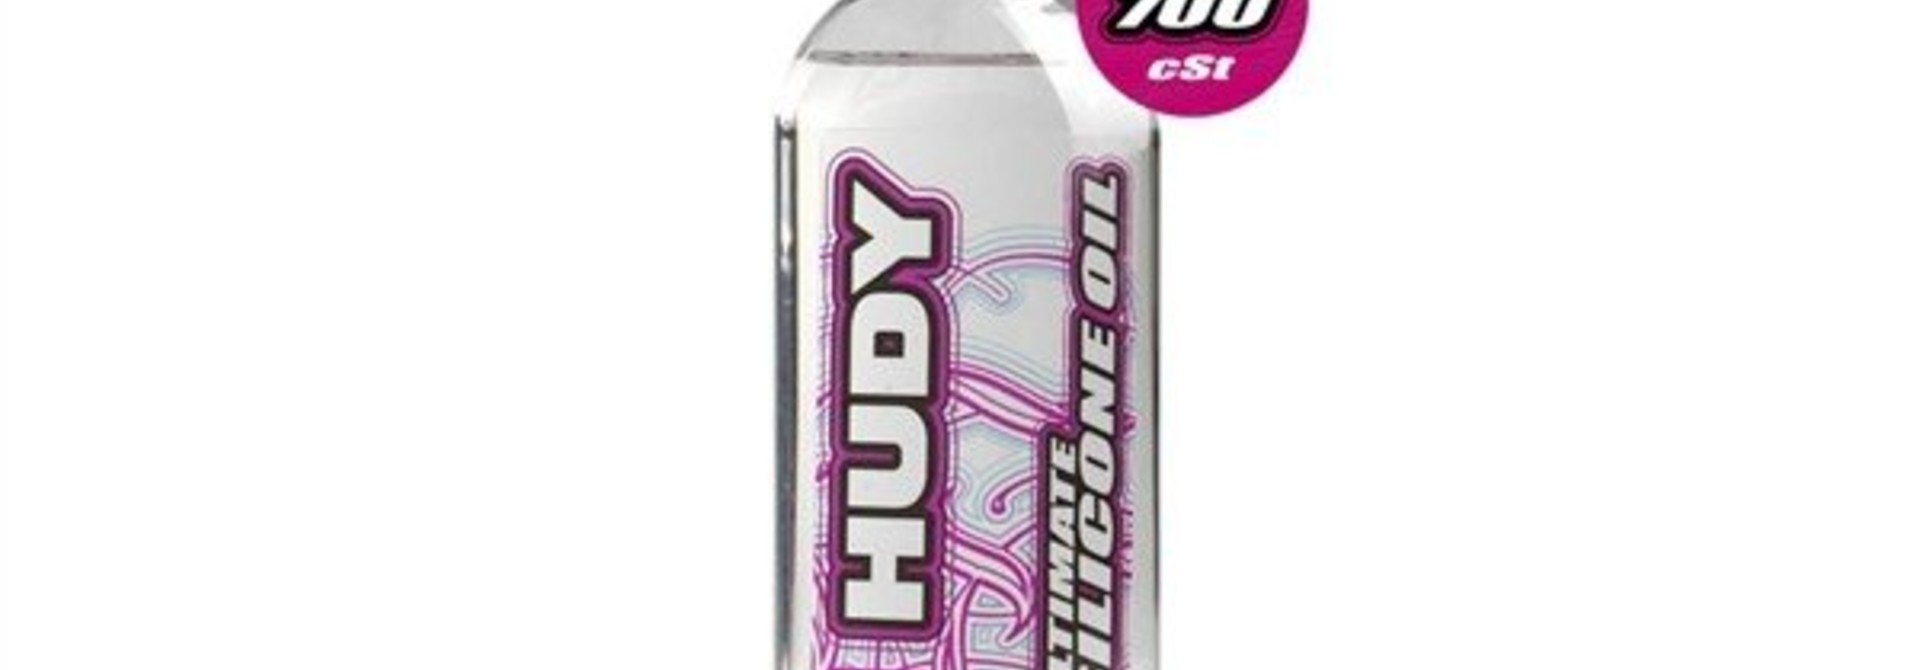 HUDY ULTIMATE SILICONE OIL 700 cSt - 100ML. H106371